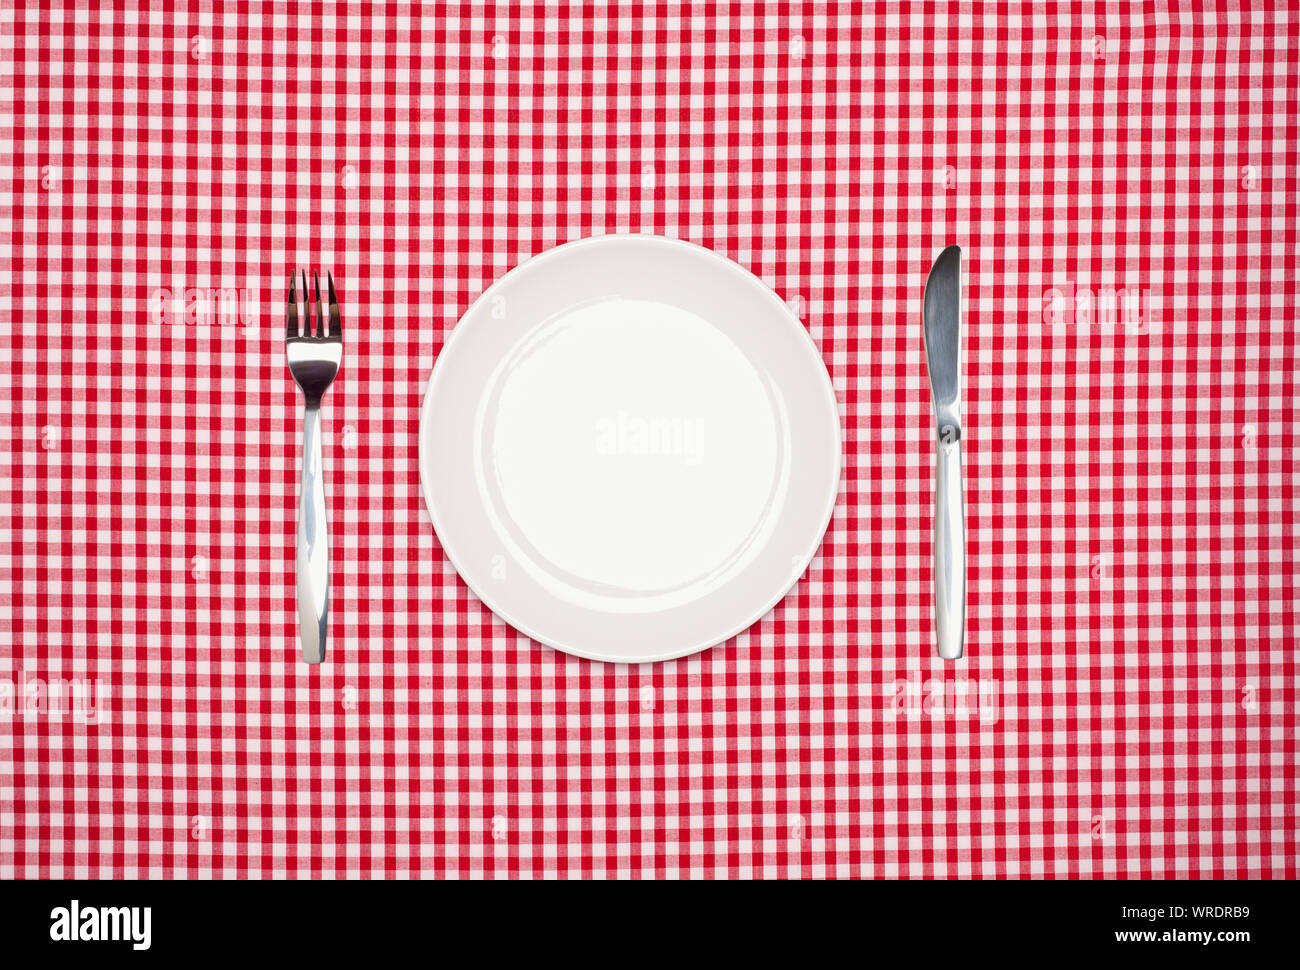 Place setting, round white plate, knife and fork, from above on a red gingham tablecloth Stock Photo